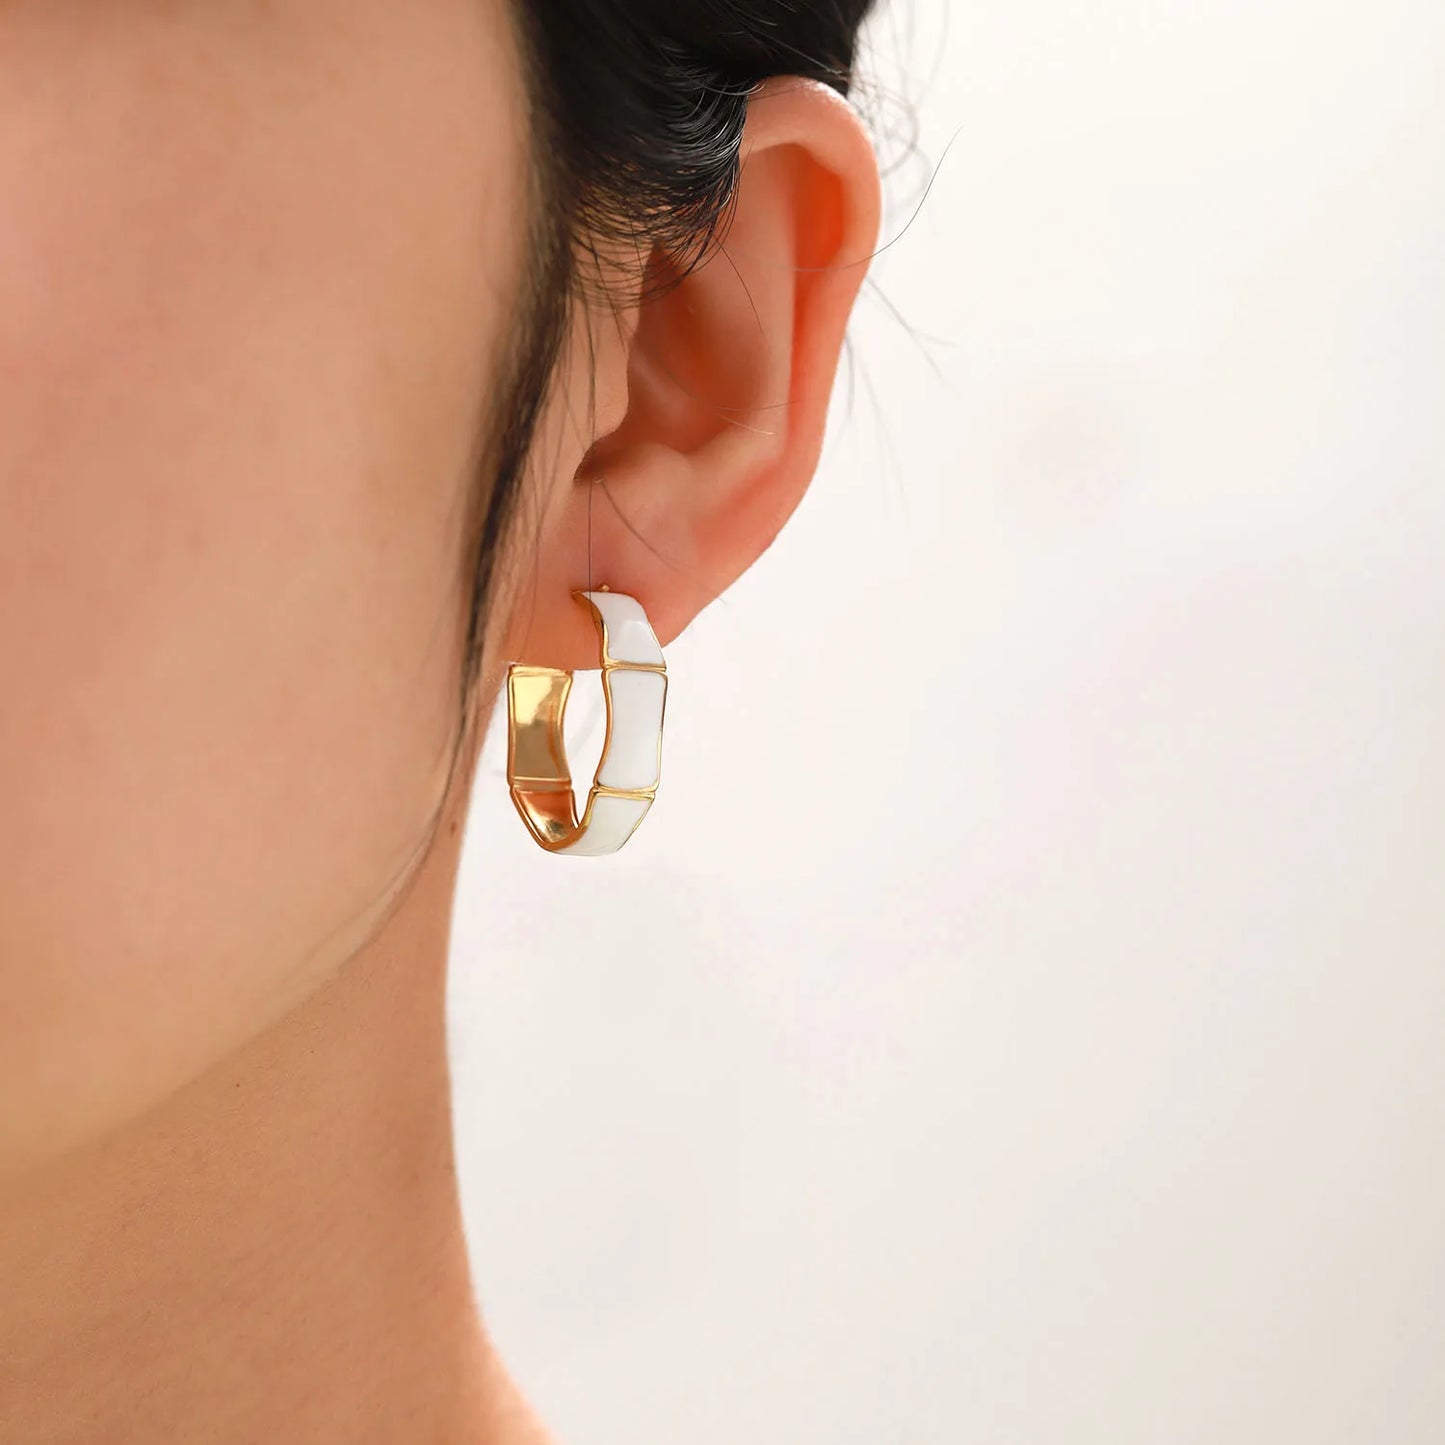 CC White Earrings 18K Gold Plated for Women with Models Ear